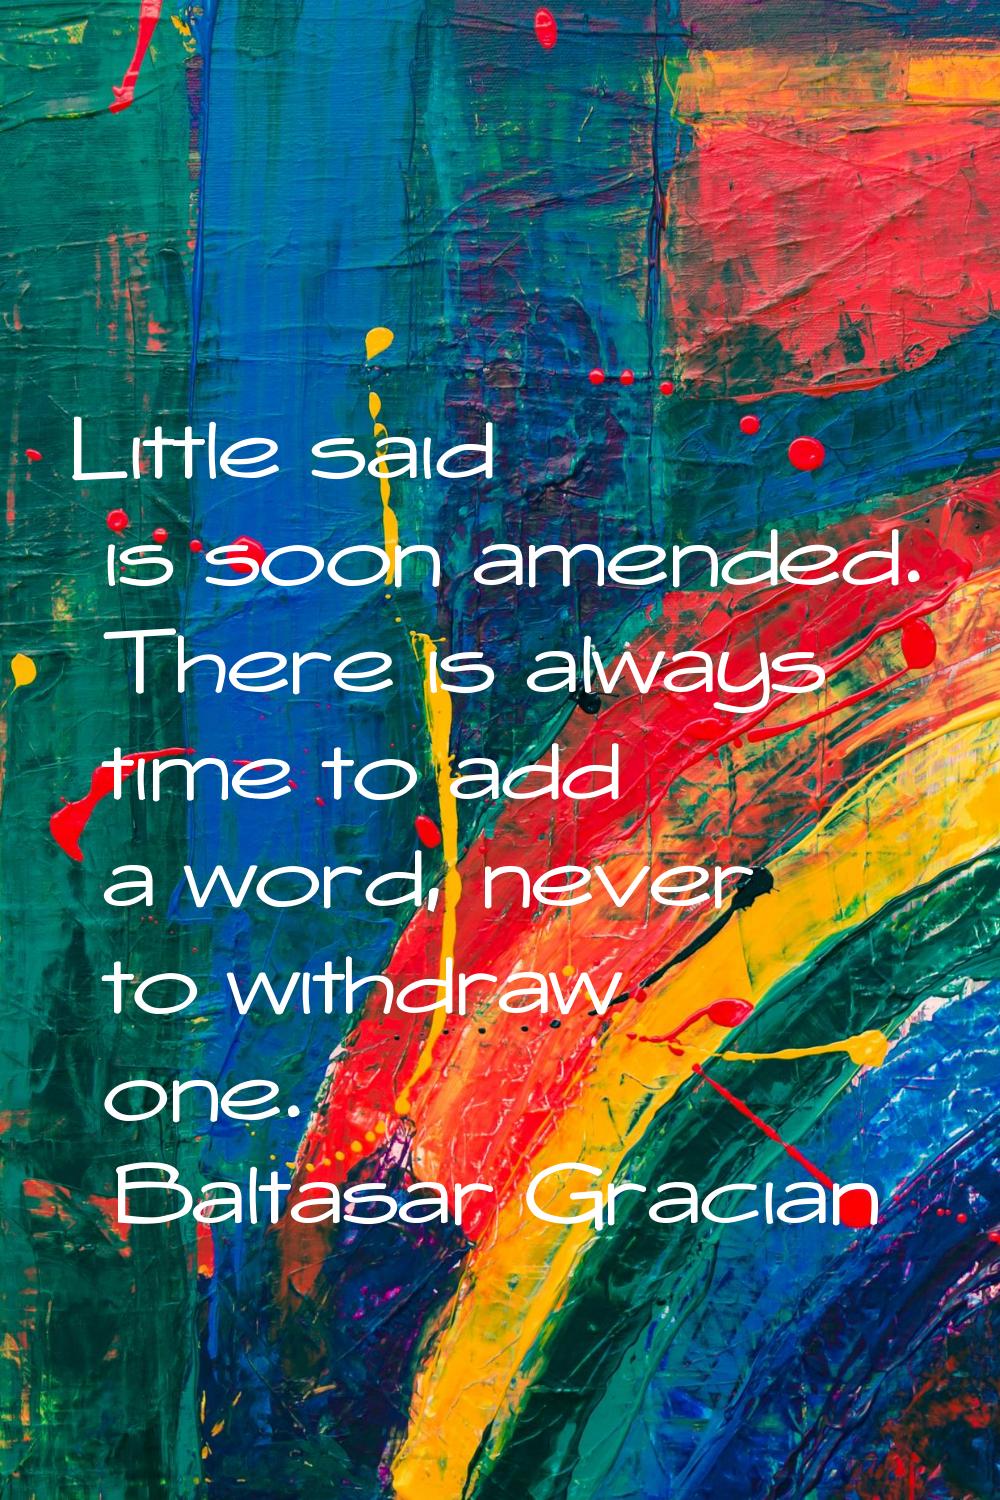 Little said is soon amended. There is always time to add a word, never to withdraw one.